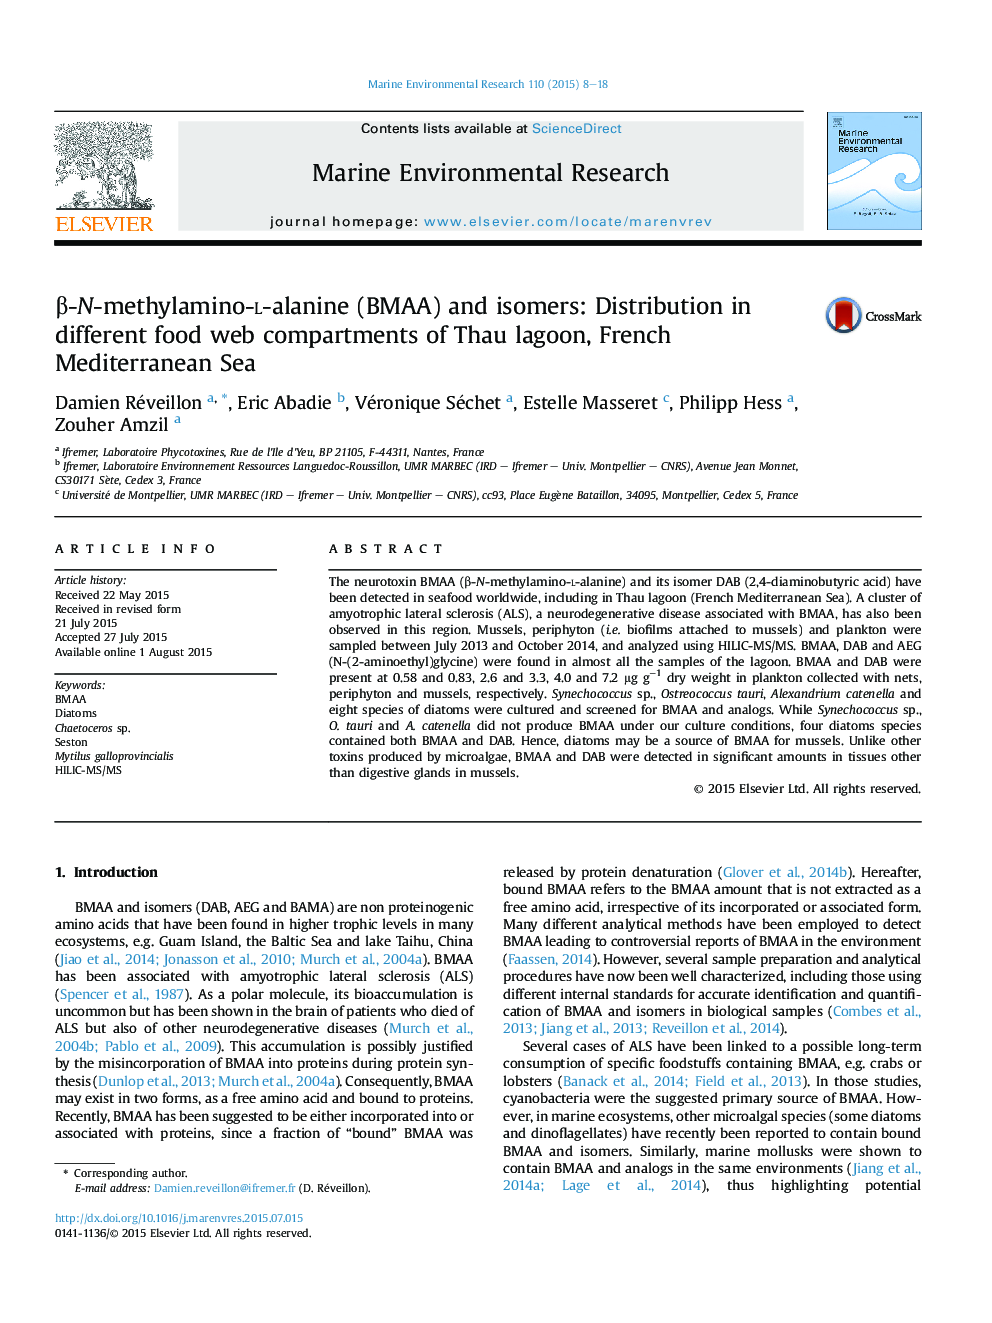 Î²-N-methylamino-l-alanine (BMAA) and isomers: Distribution in different food web compartments of Thau lagoon, French Mediterranean Sea